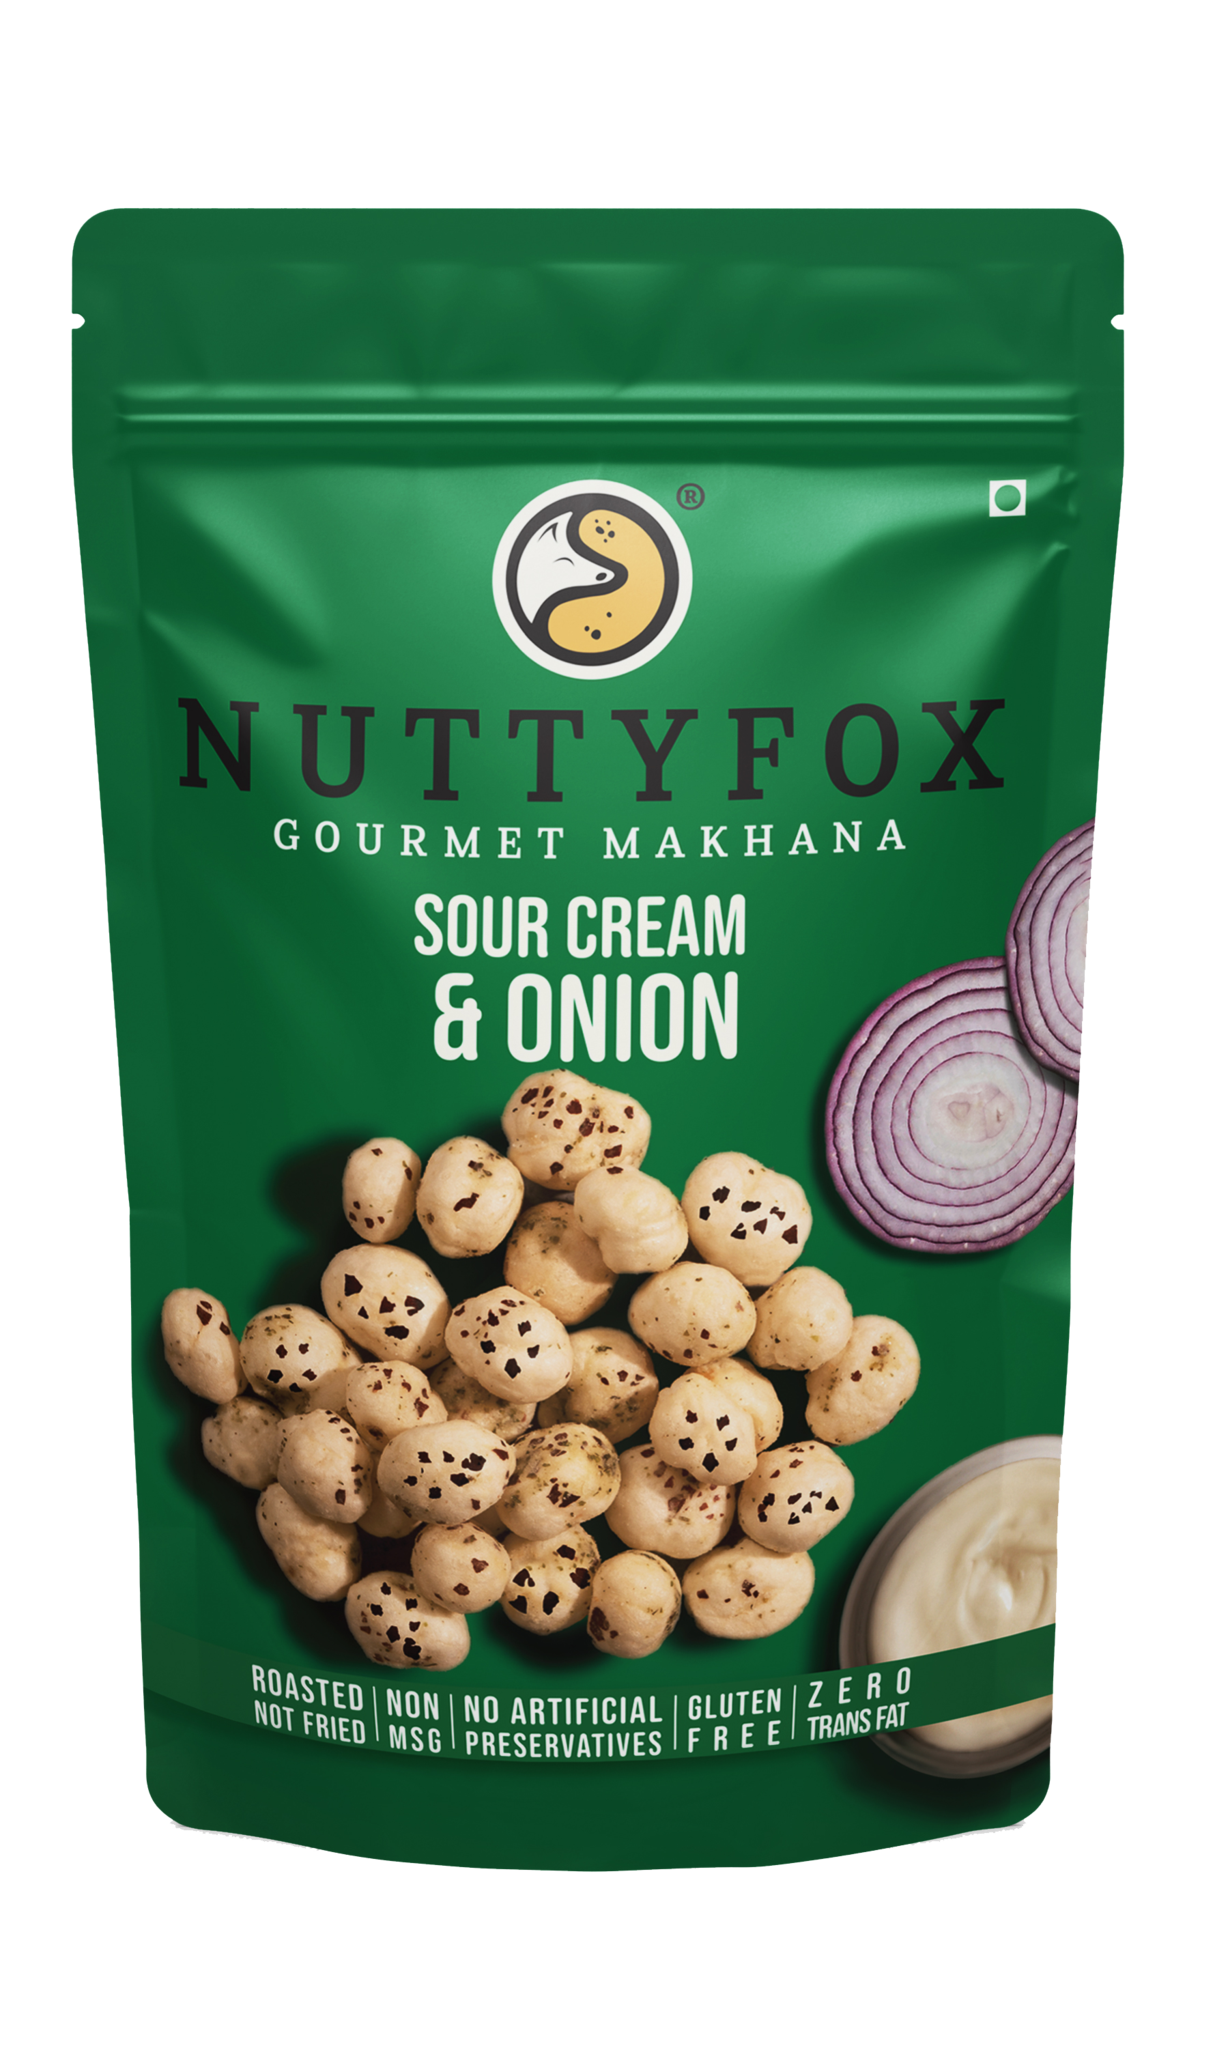 NuttyFox Gourmet Makhana - All Flavours Combo - Pack of 4